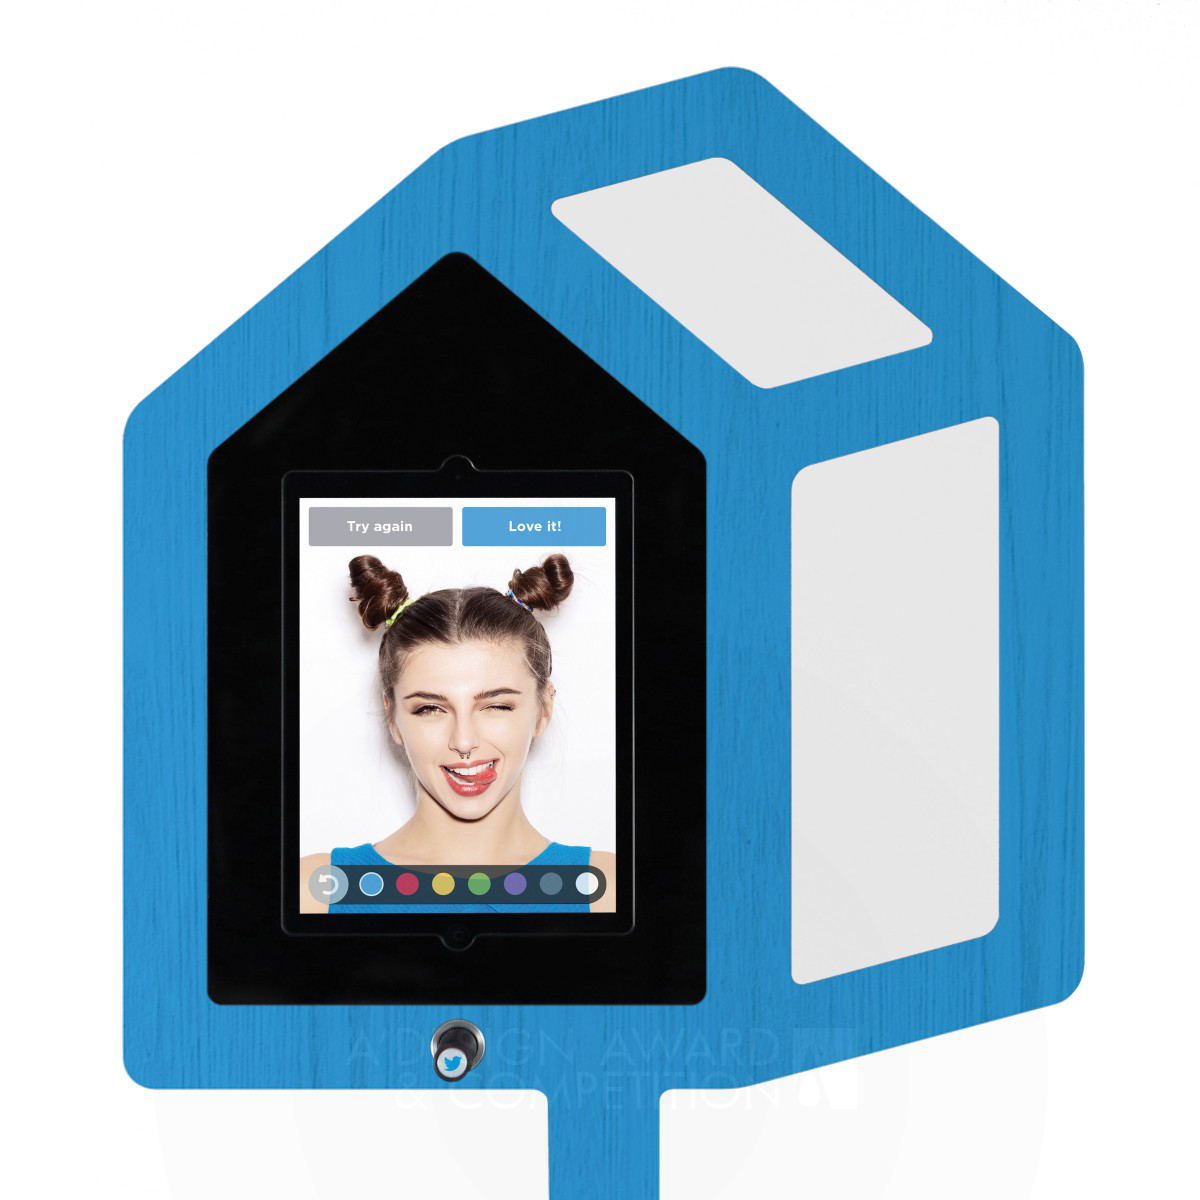 Twitter Mirror Social networking selfie booth by Pip Tompkin Design